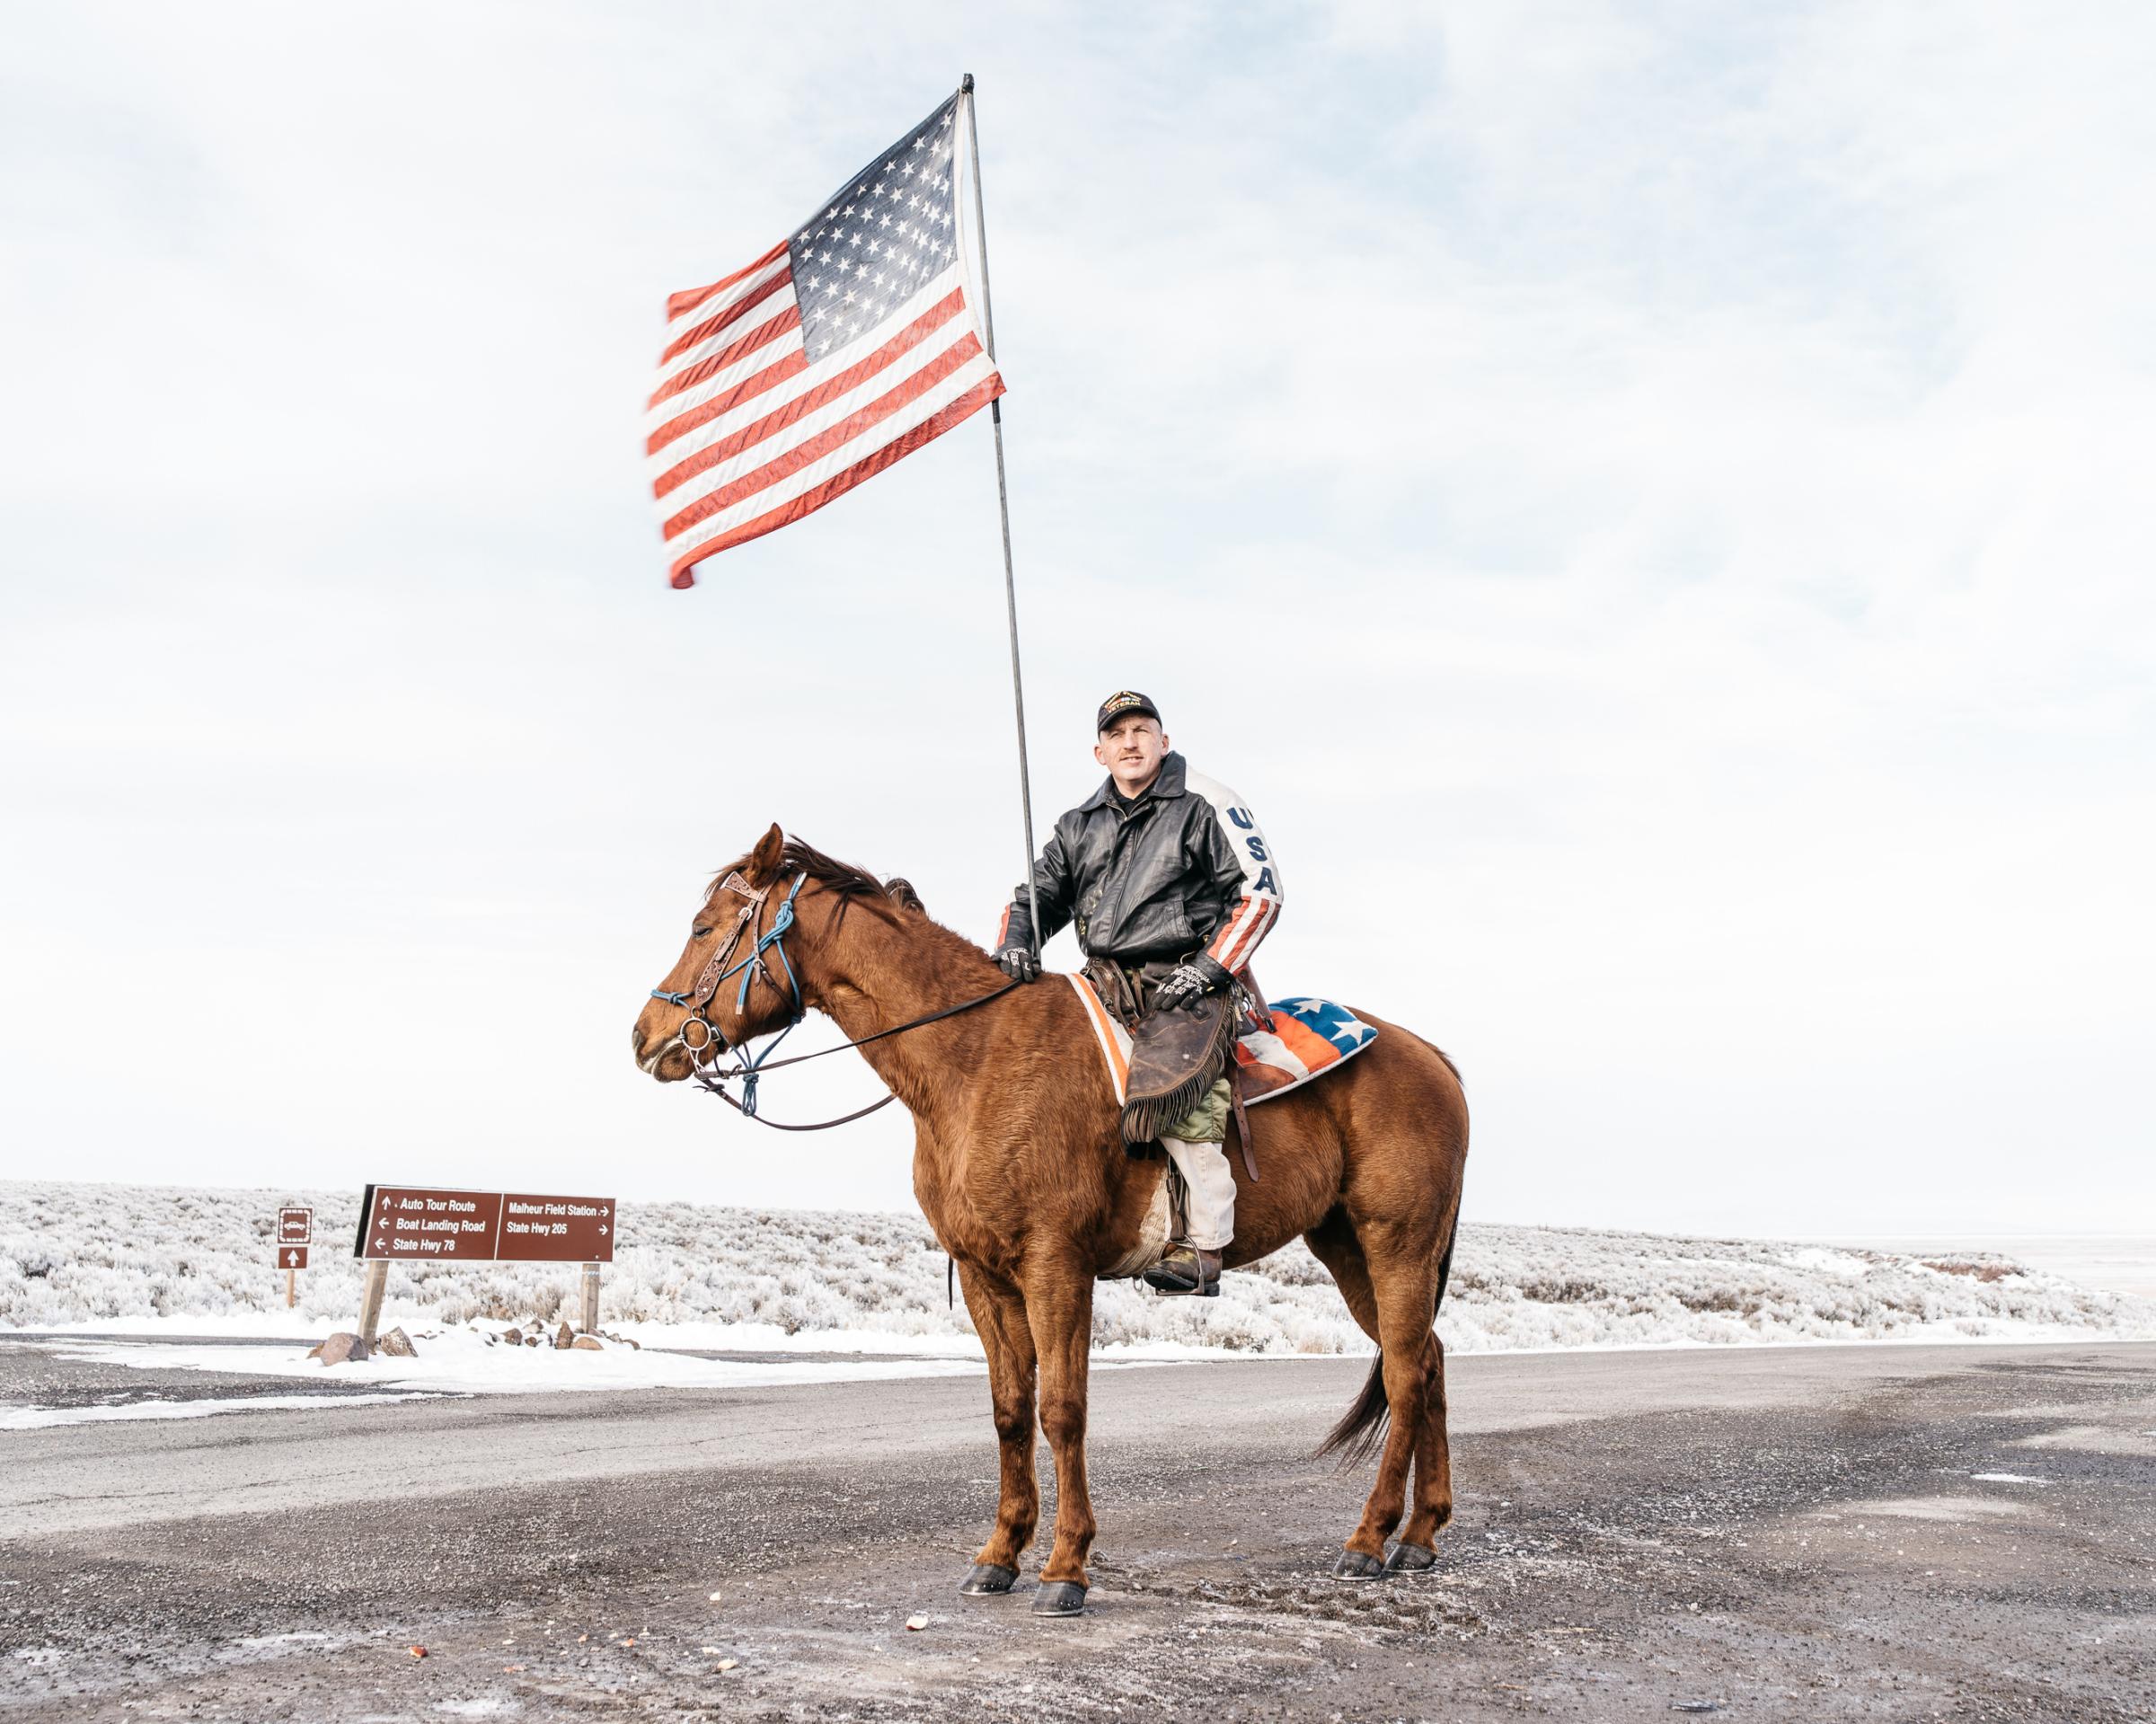 Dwayne Ehmer, of Irrigon, Ore., sits atop his horse Hellboy as they greet media on Jan. 12, 2016, at the entrance to the Malheur National Wildlife Refuge in Harney County, Ore.